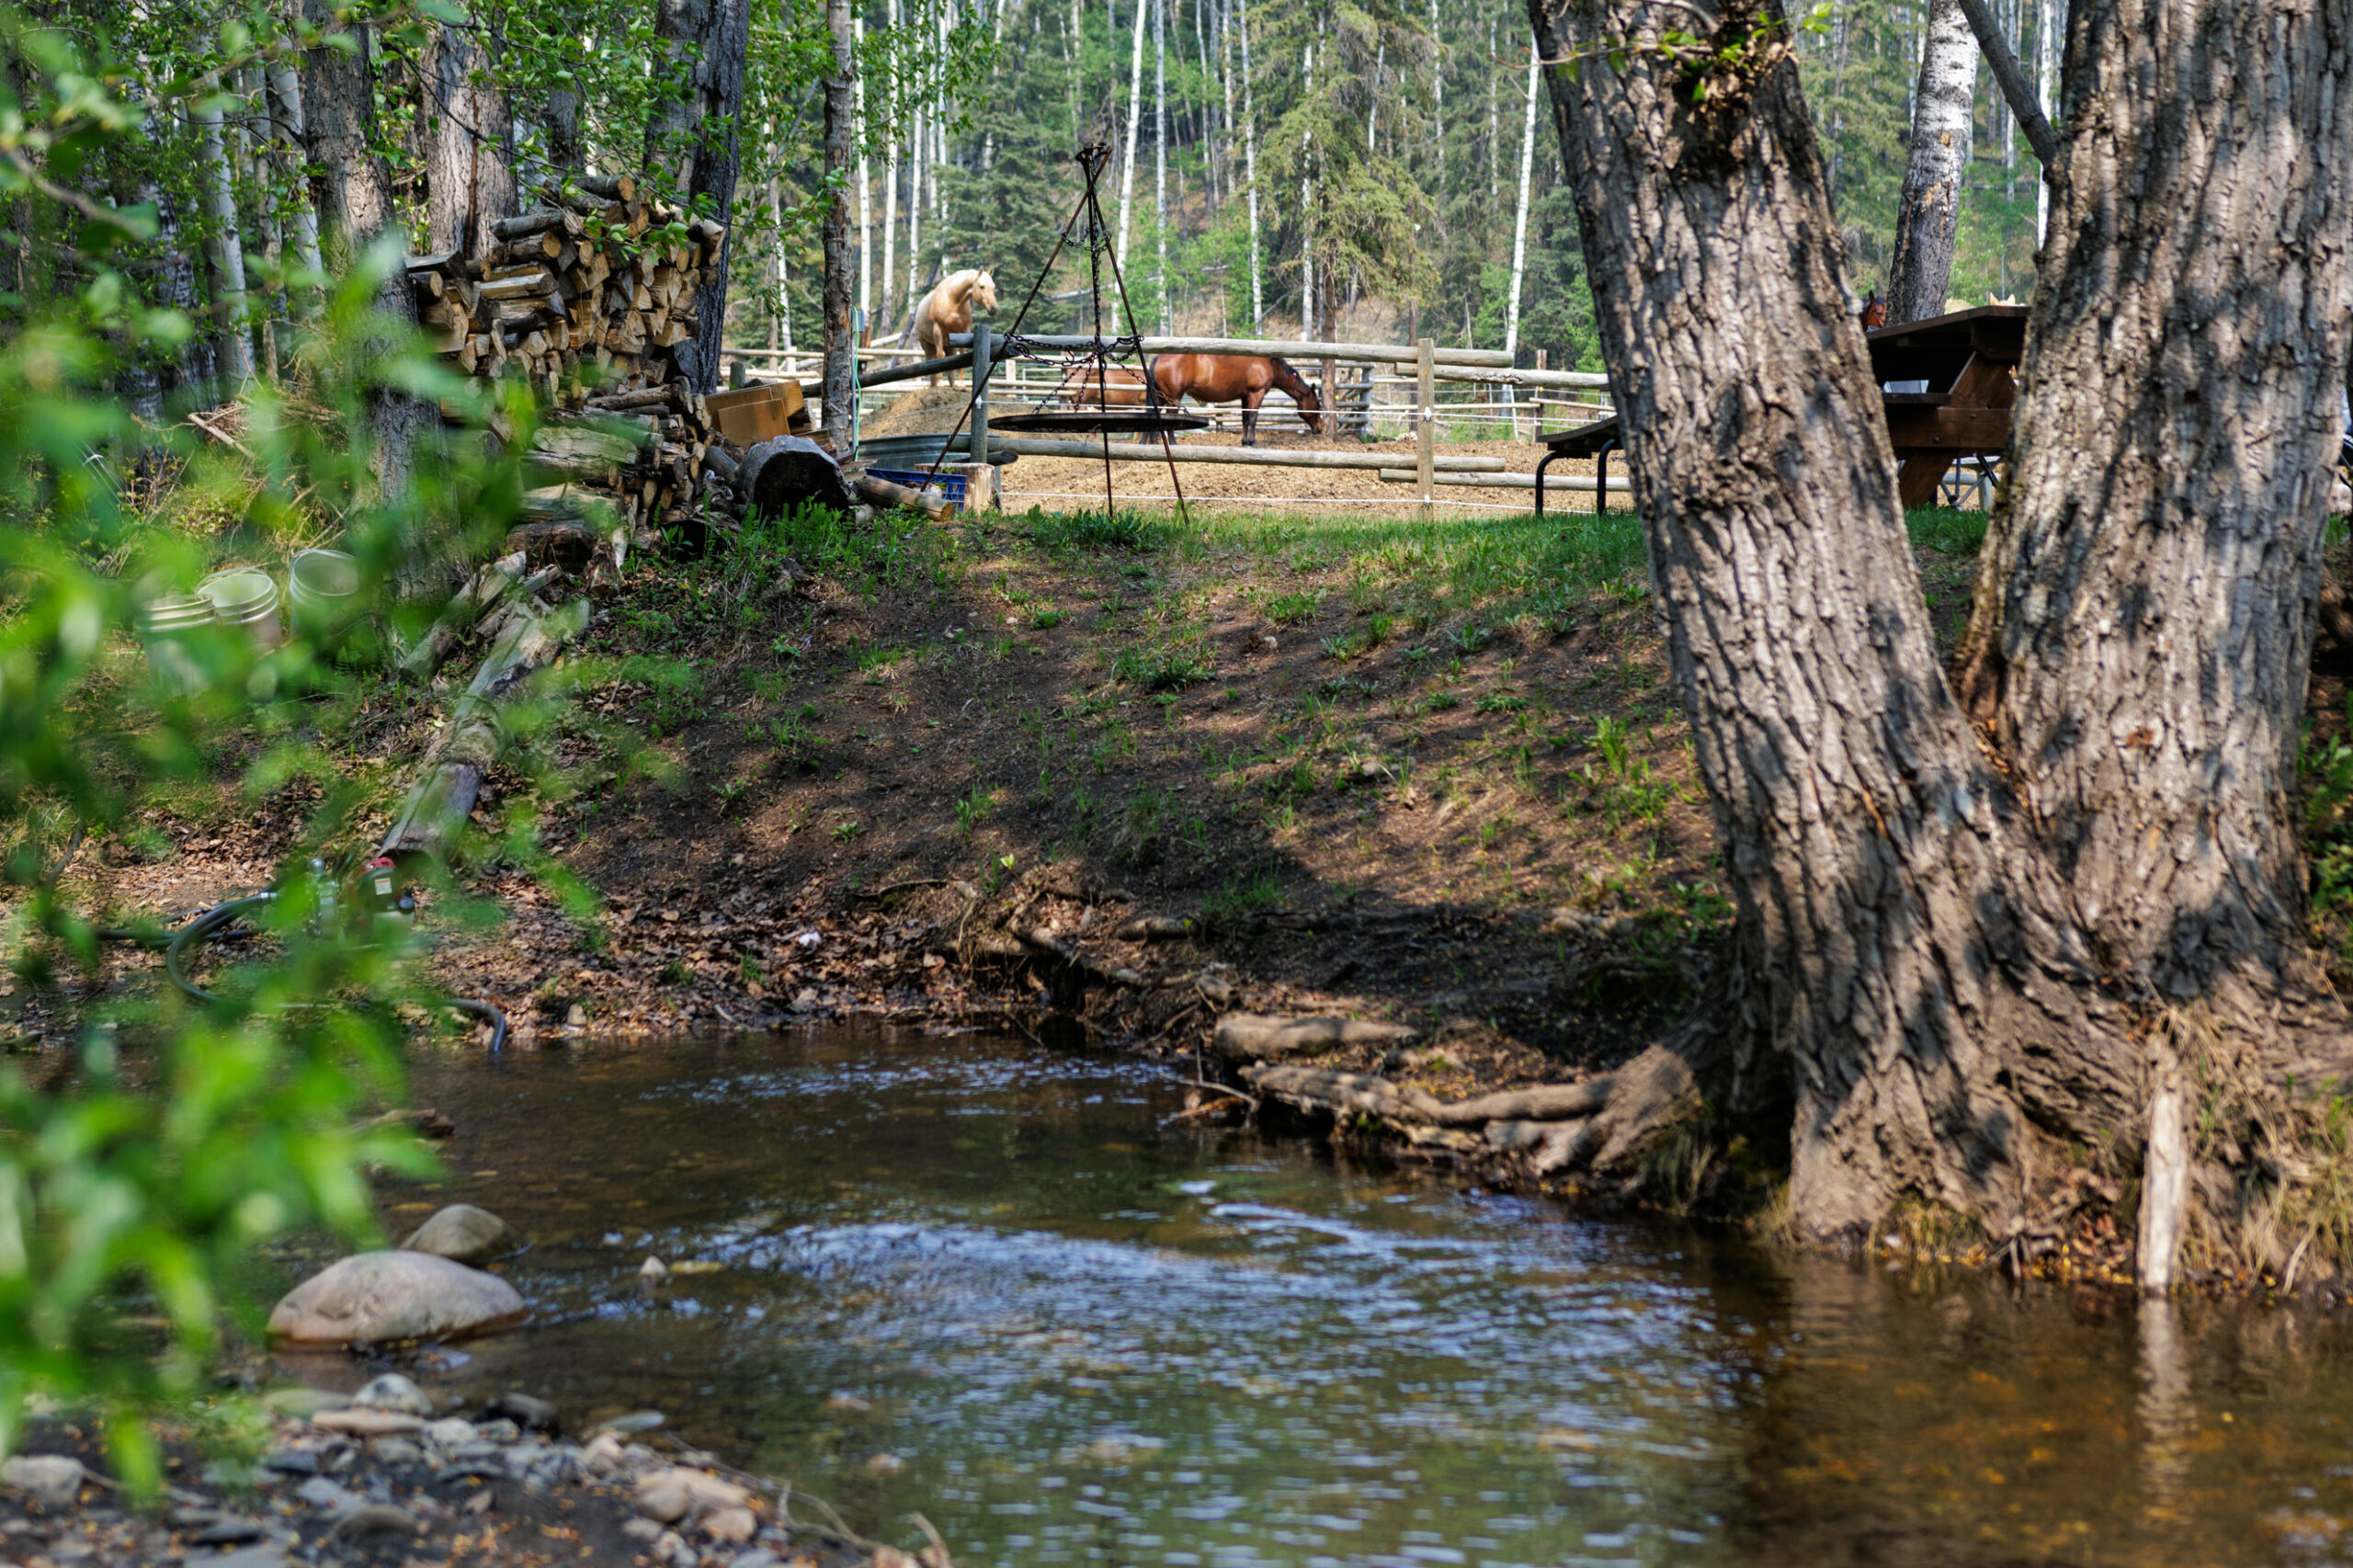 A creek with horse corral in the background